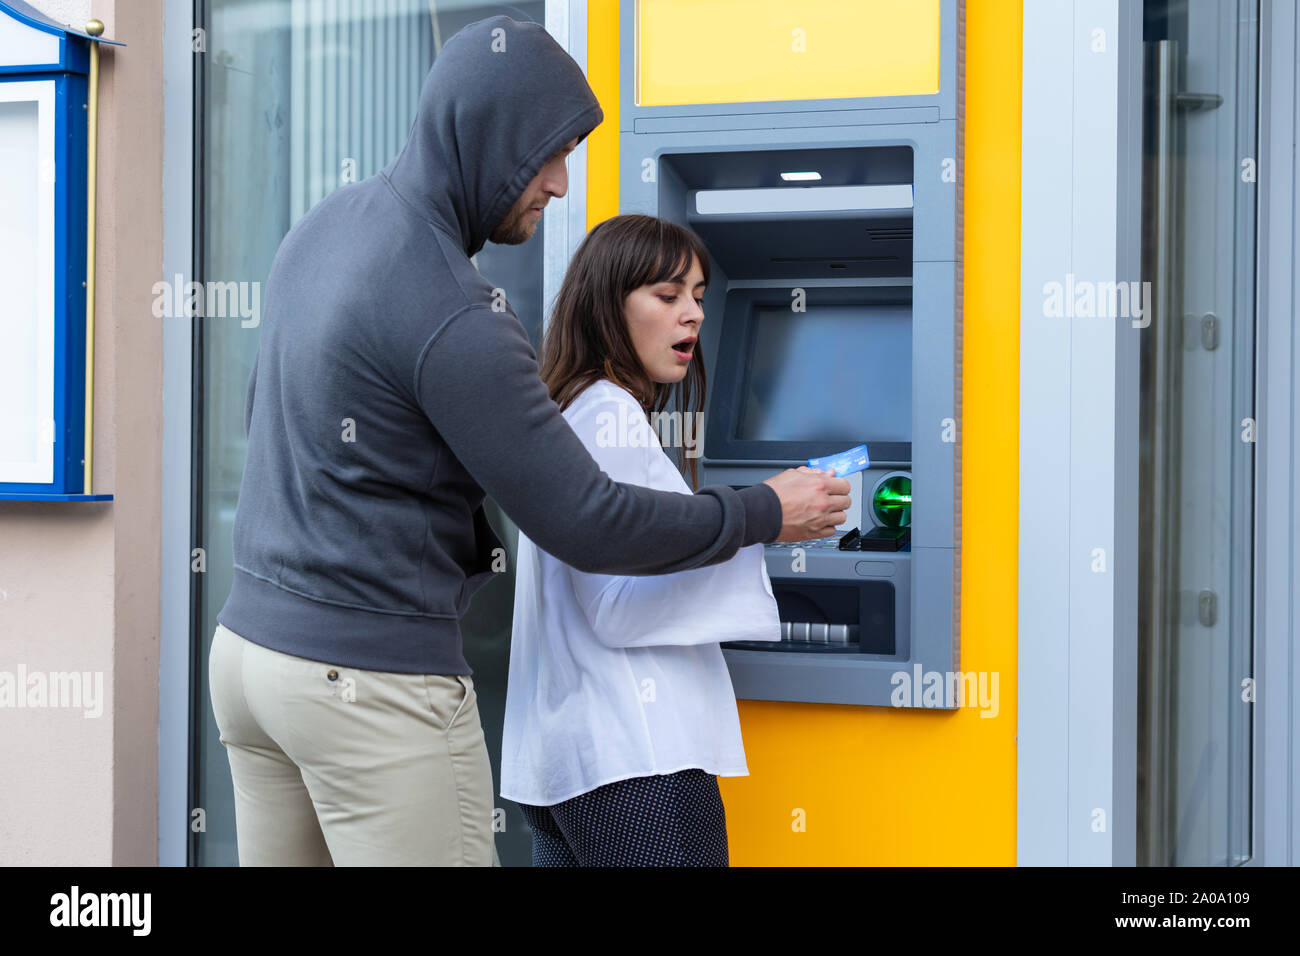 Aggressive Thief In Gray Hoodie Stealing Card From Woman Standing Near The Automatic Teller Machine Stock Photo